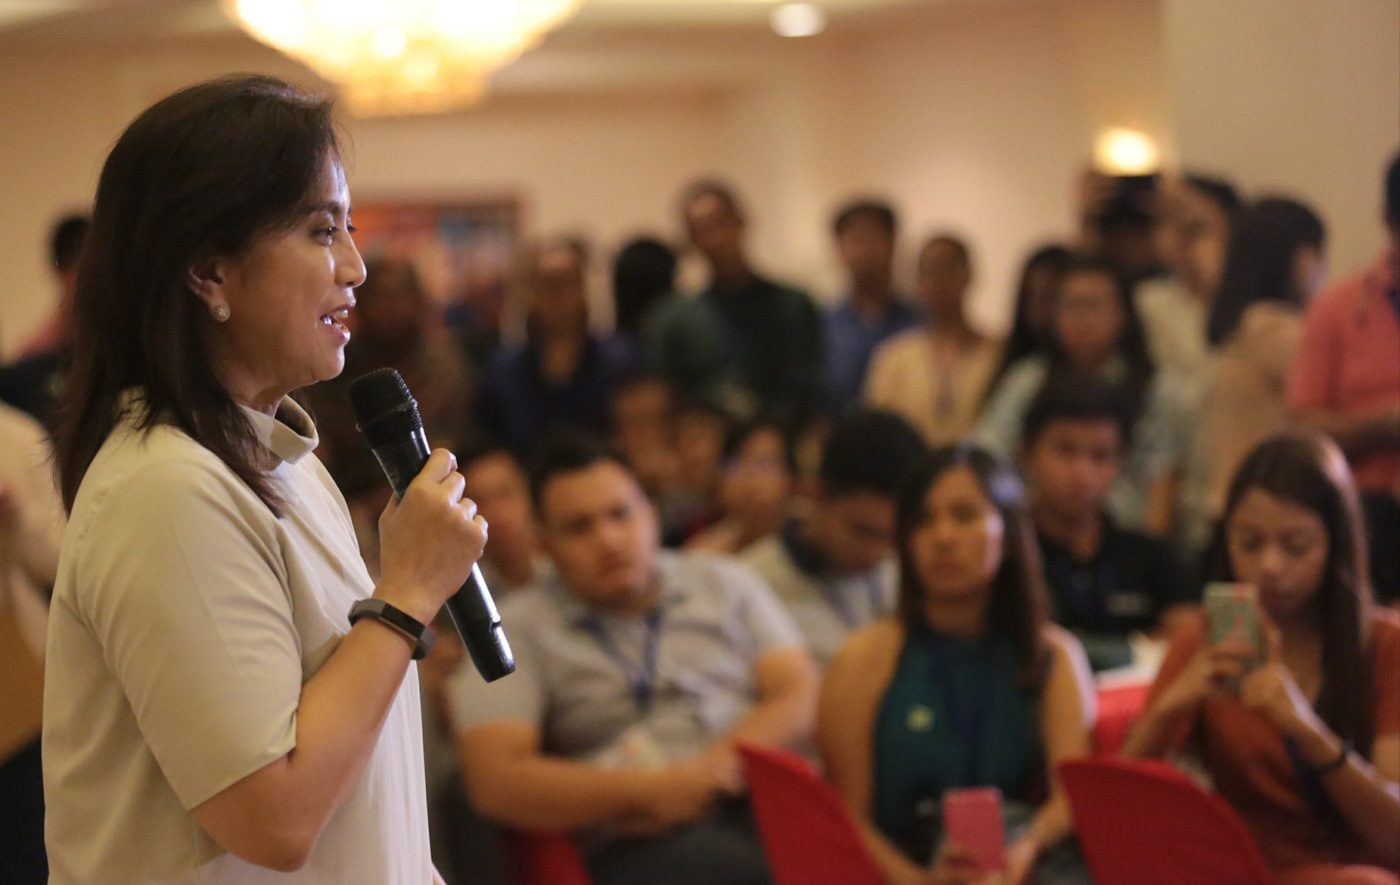 Robredo to youth: Don’t lose hope, good will triumph over evil